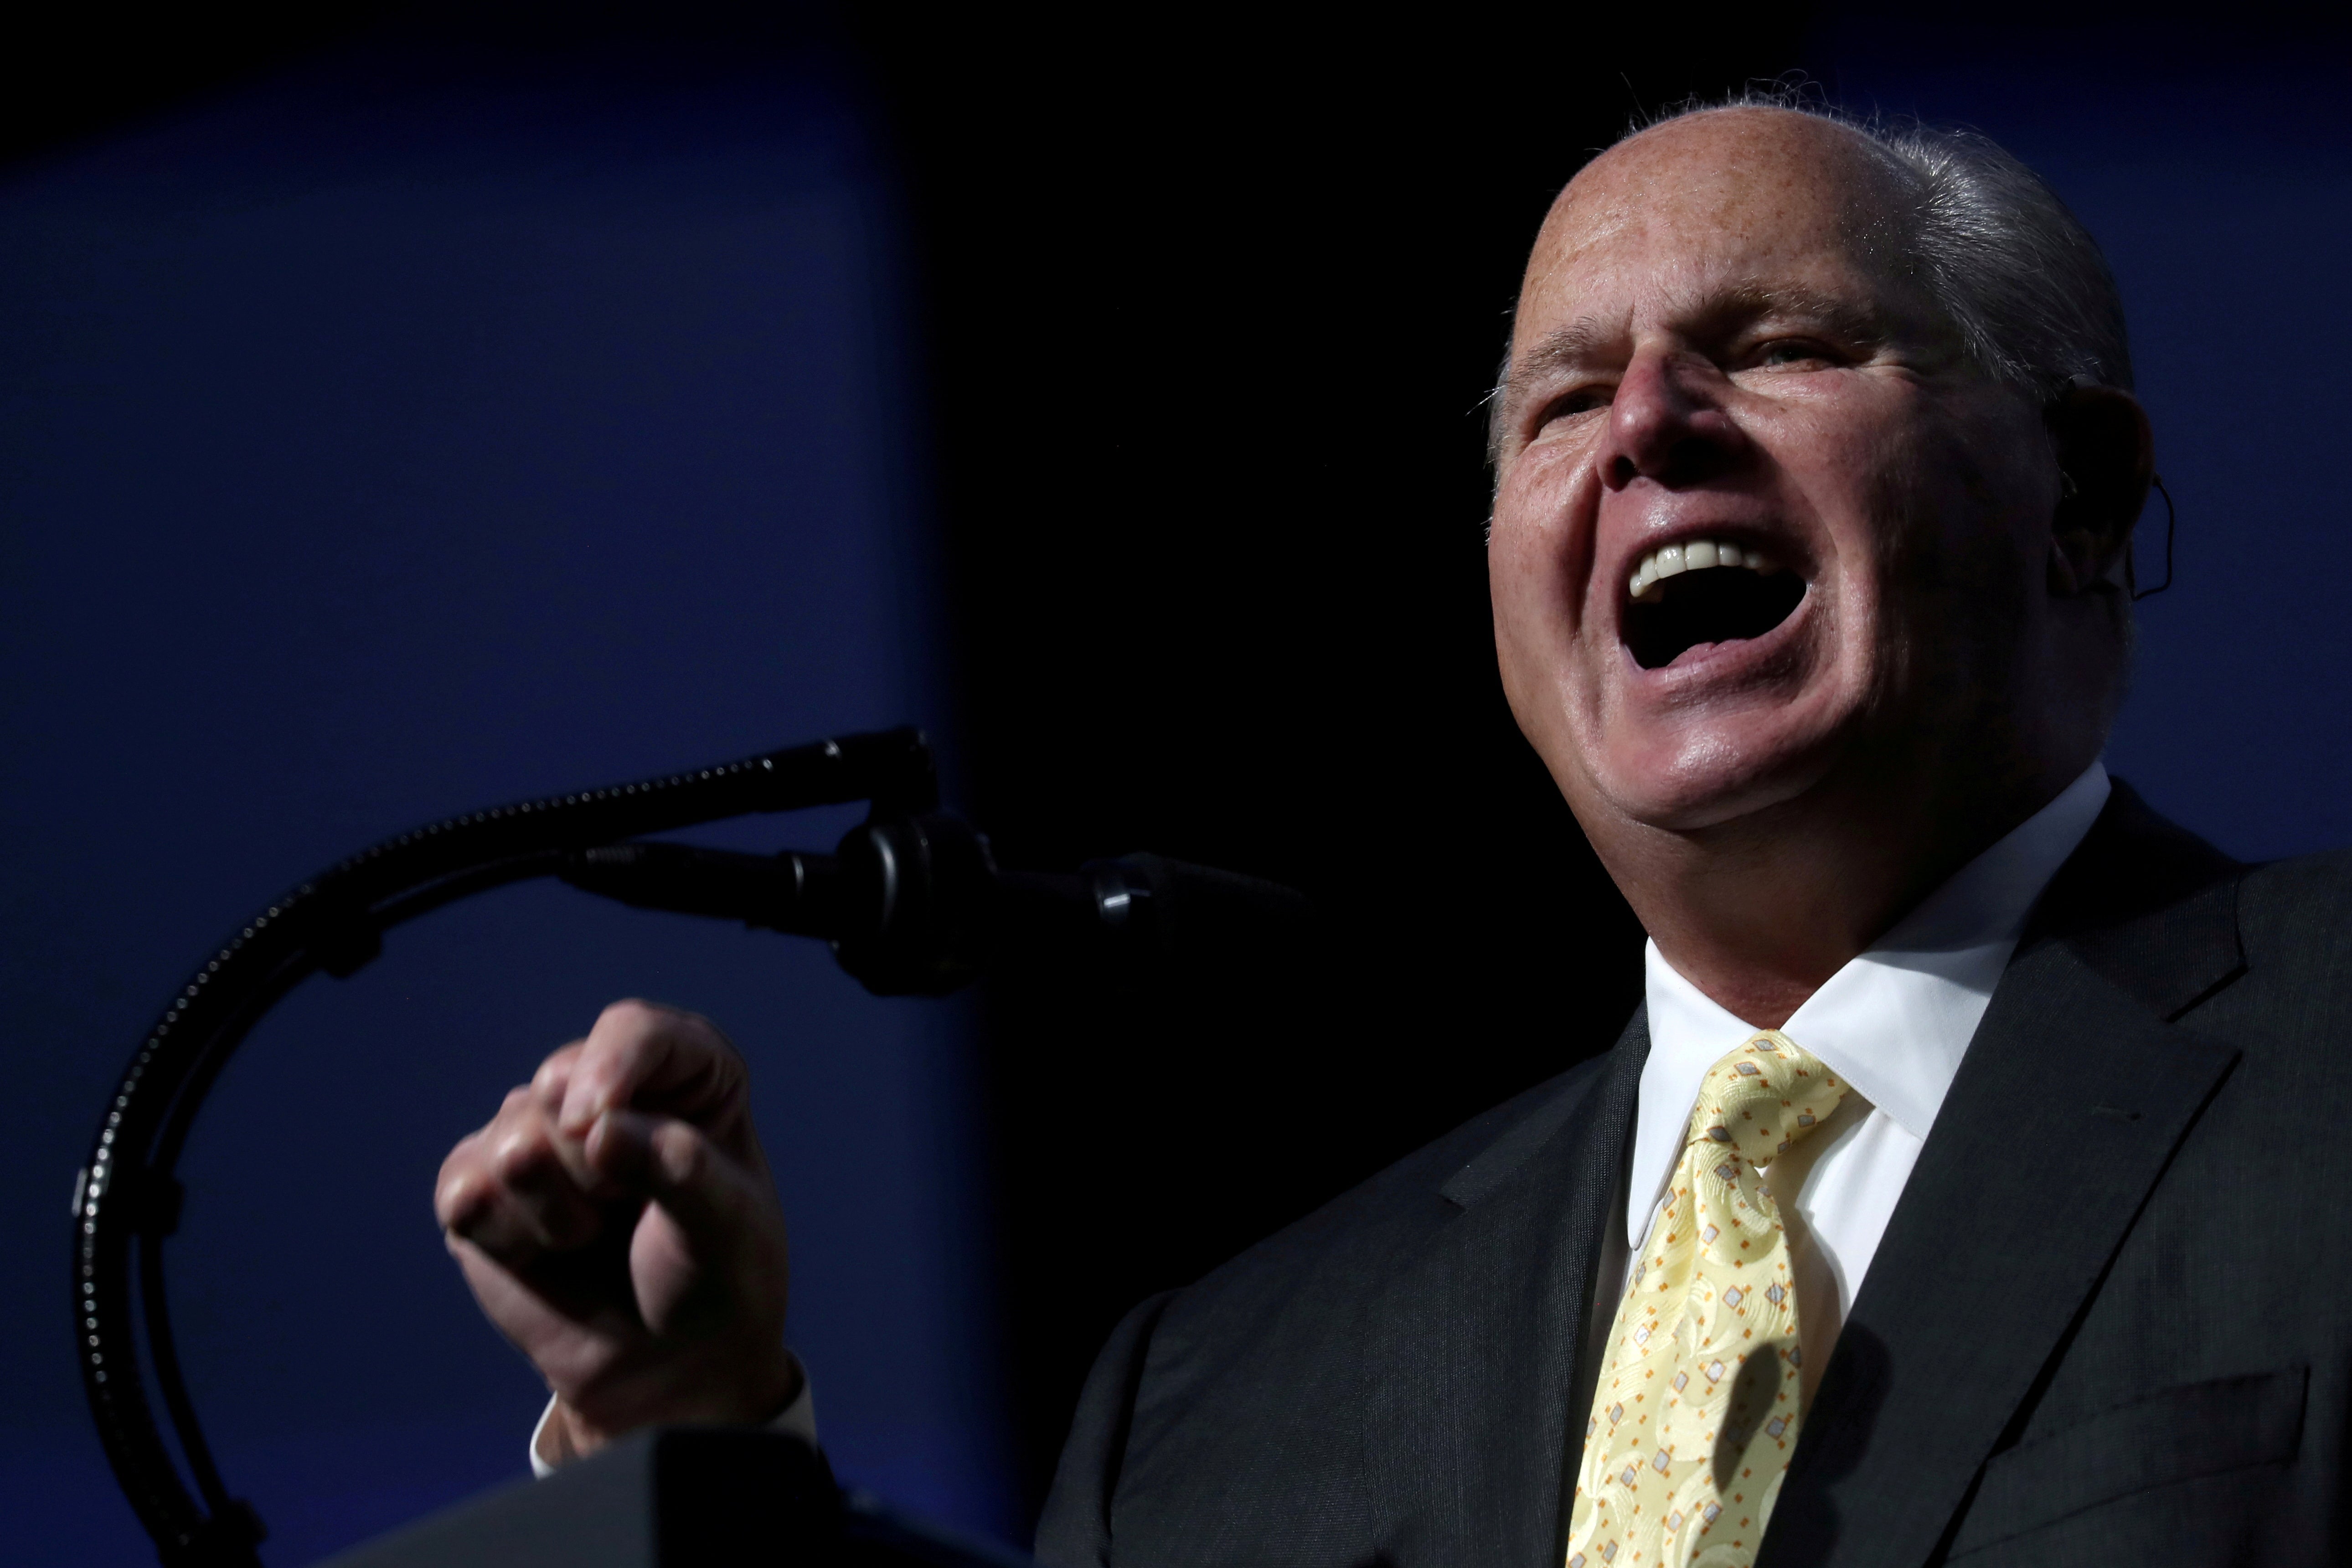 Rush Limbaugh points and speaks into a microphone.